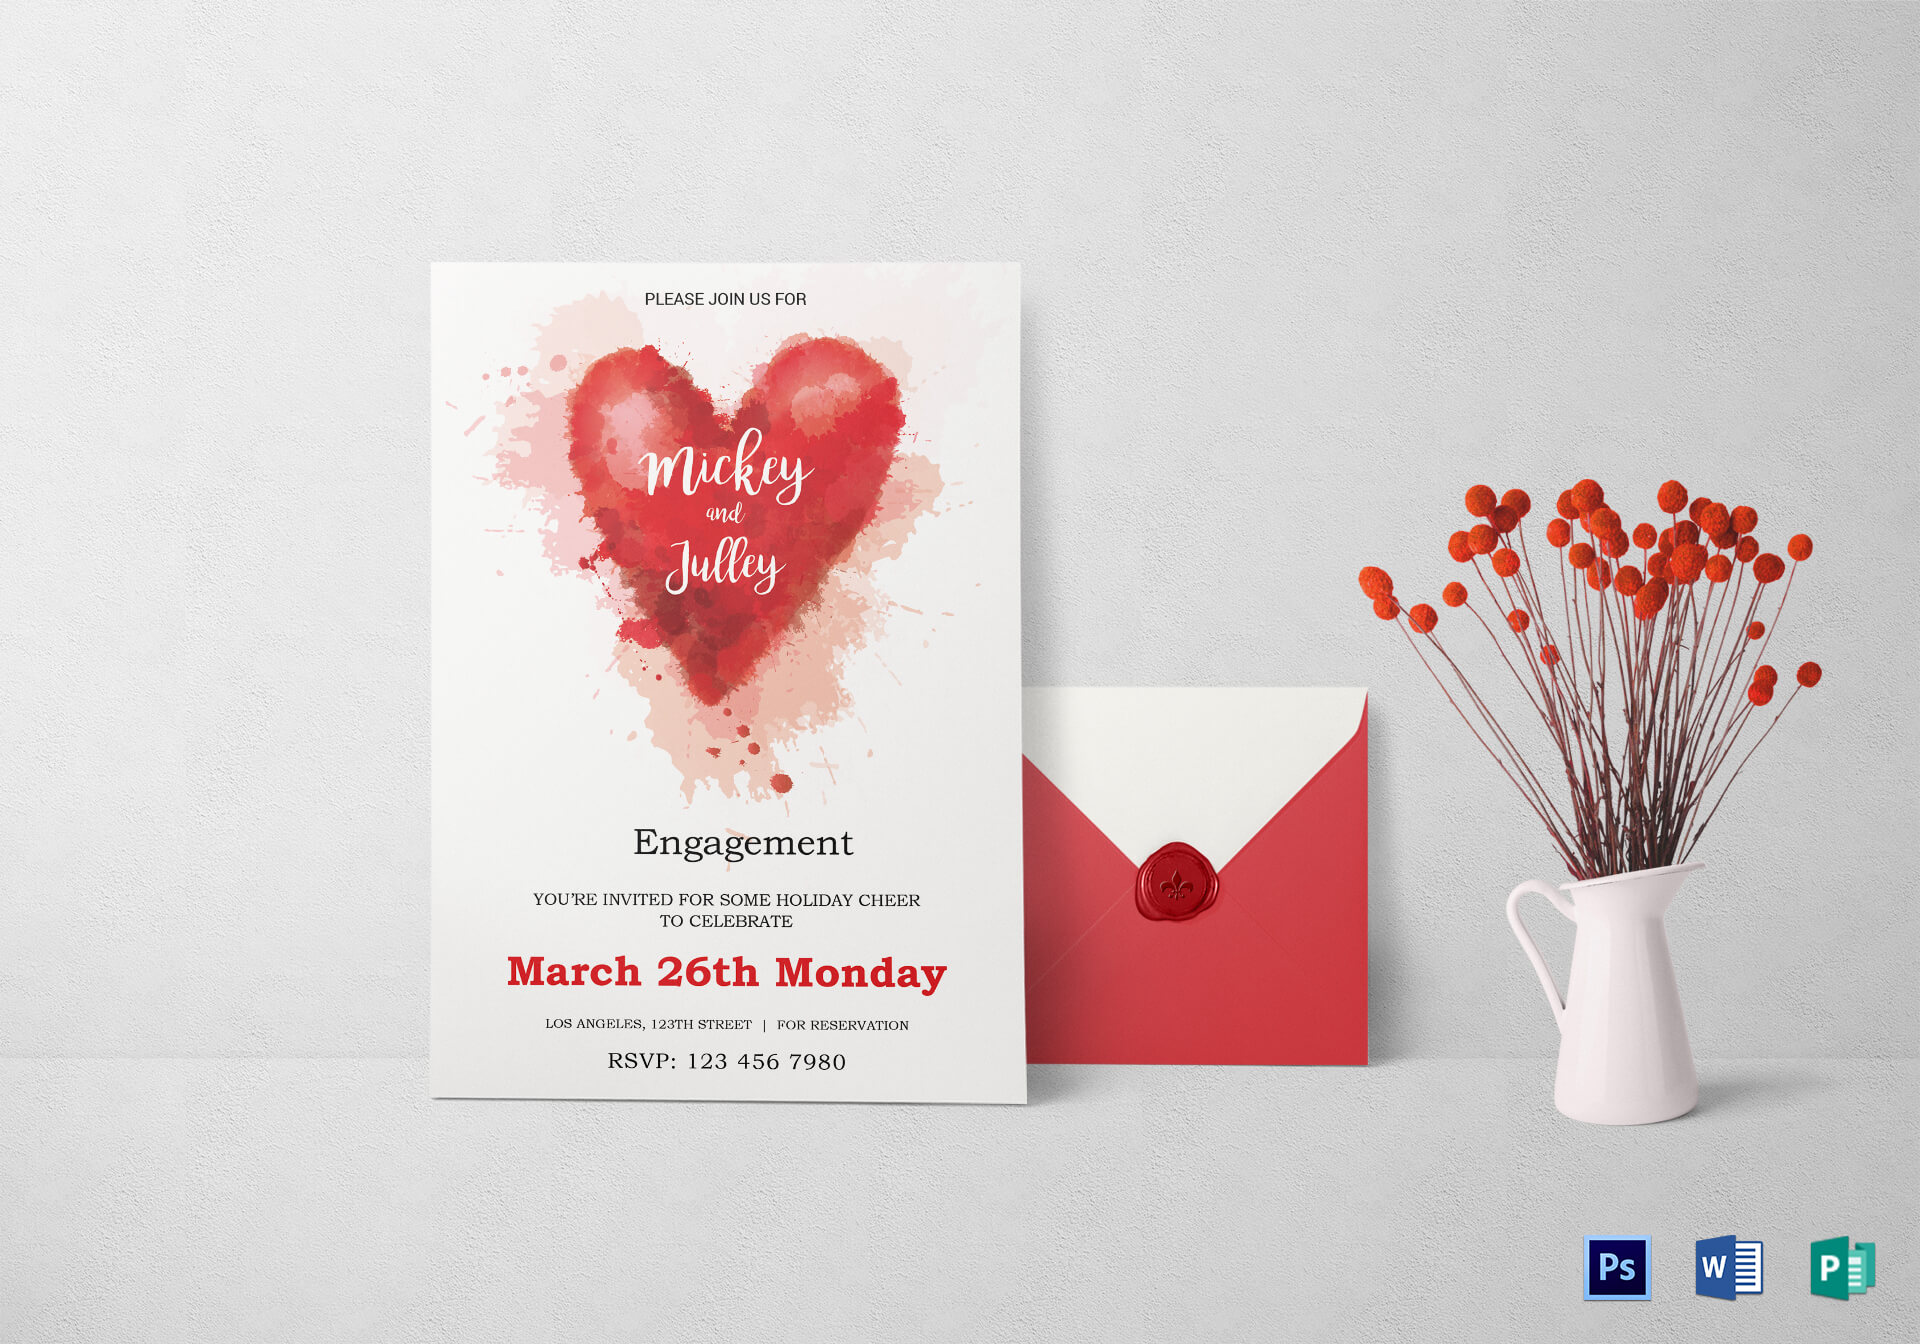 Colorful Engagement Invitation Card Template Throughout Engagement Invitation Card Template